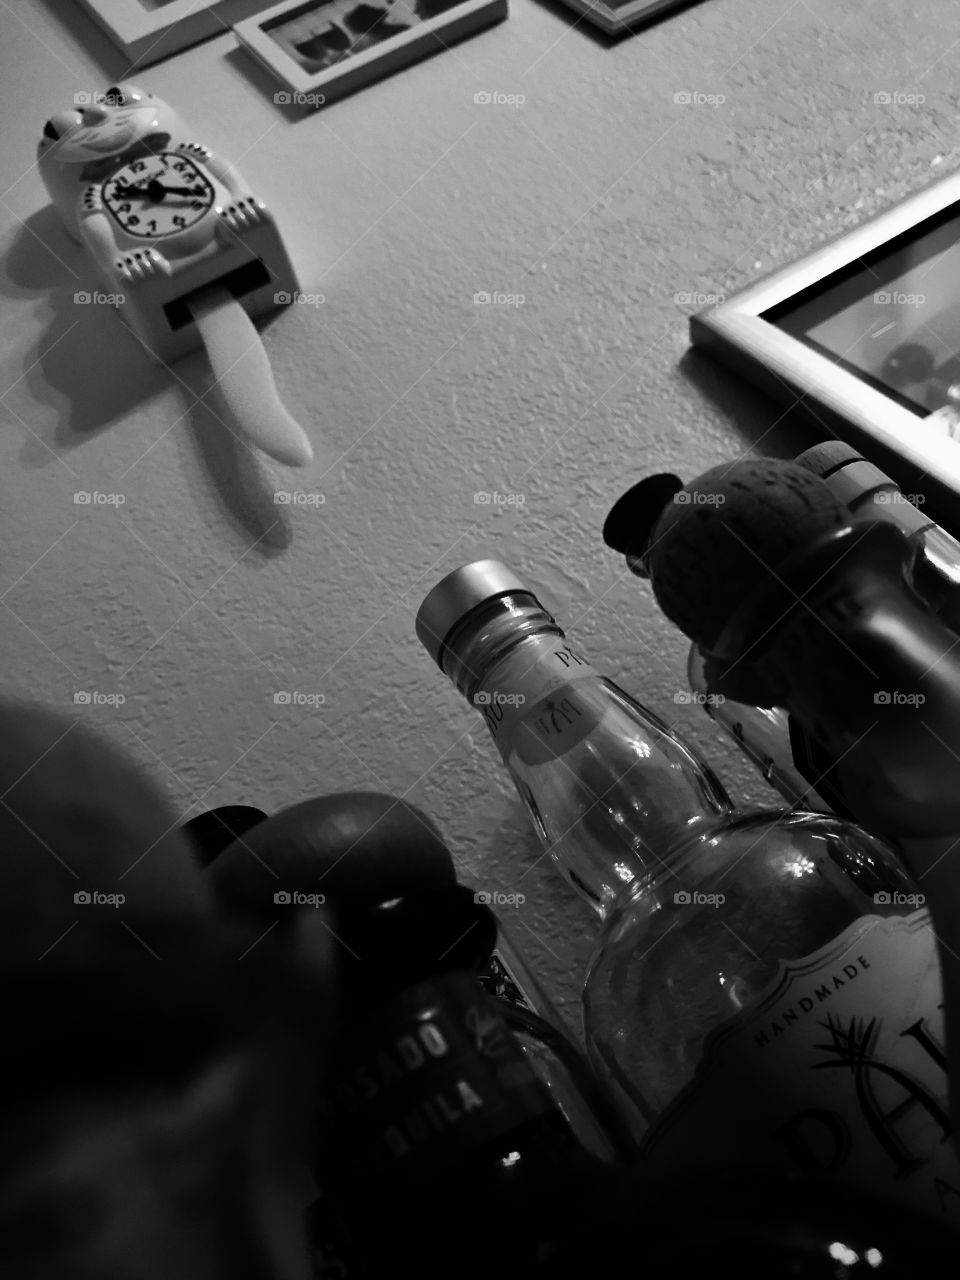 A dark monochrome photo of alcohol bottles looking upward at a kit kat clock. It’s darkly humorous, perhaps even ominous as the clock might indicate timing and something imminent about to happen. Subtle mortality.